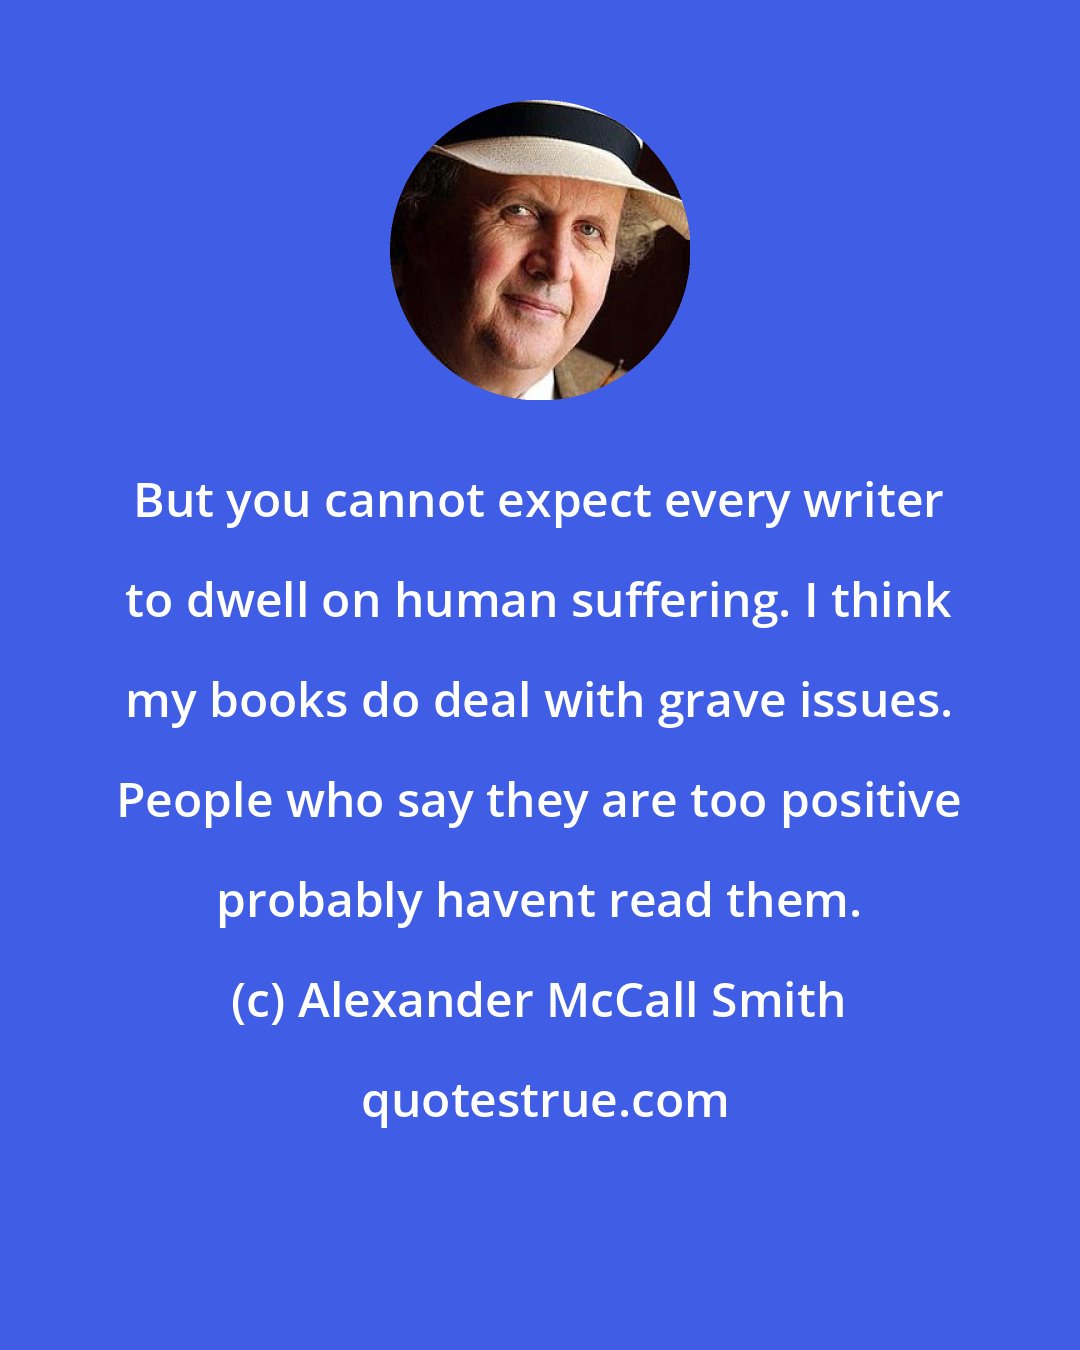 Alexander McCall Smith: But you cannot expect every writer to dwell on human suffering. I think my books do deal with grave issues. People who say they are too positive probably havent read them.